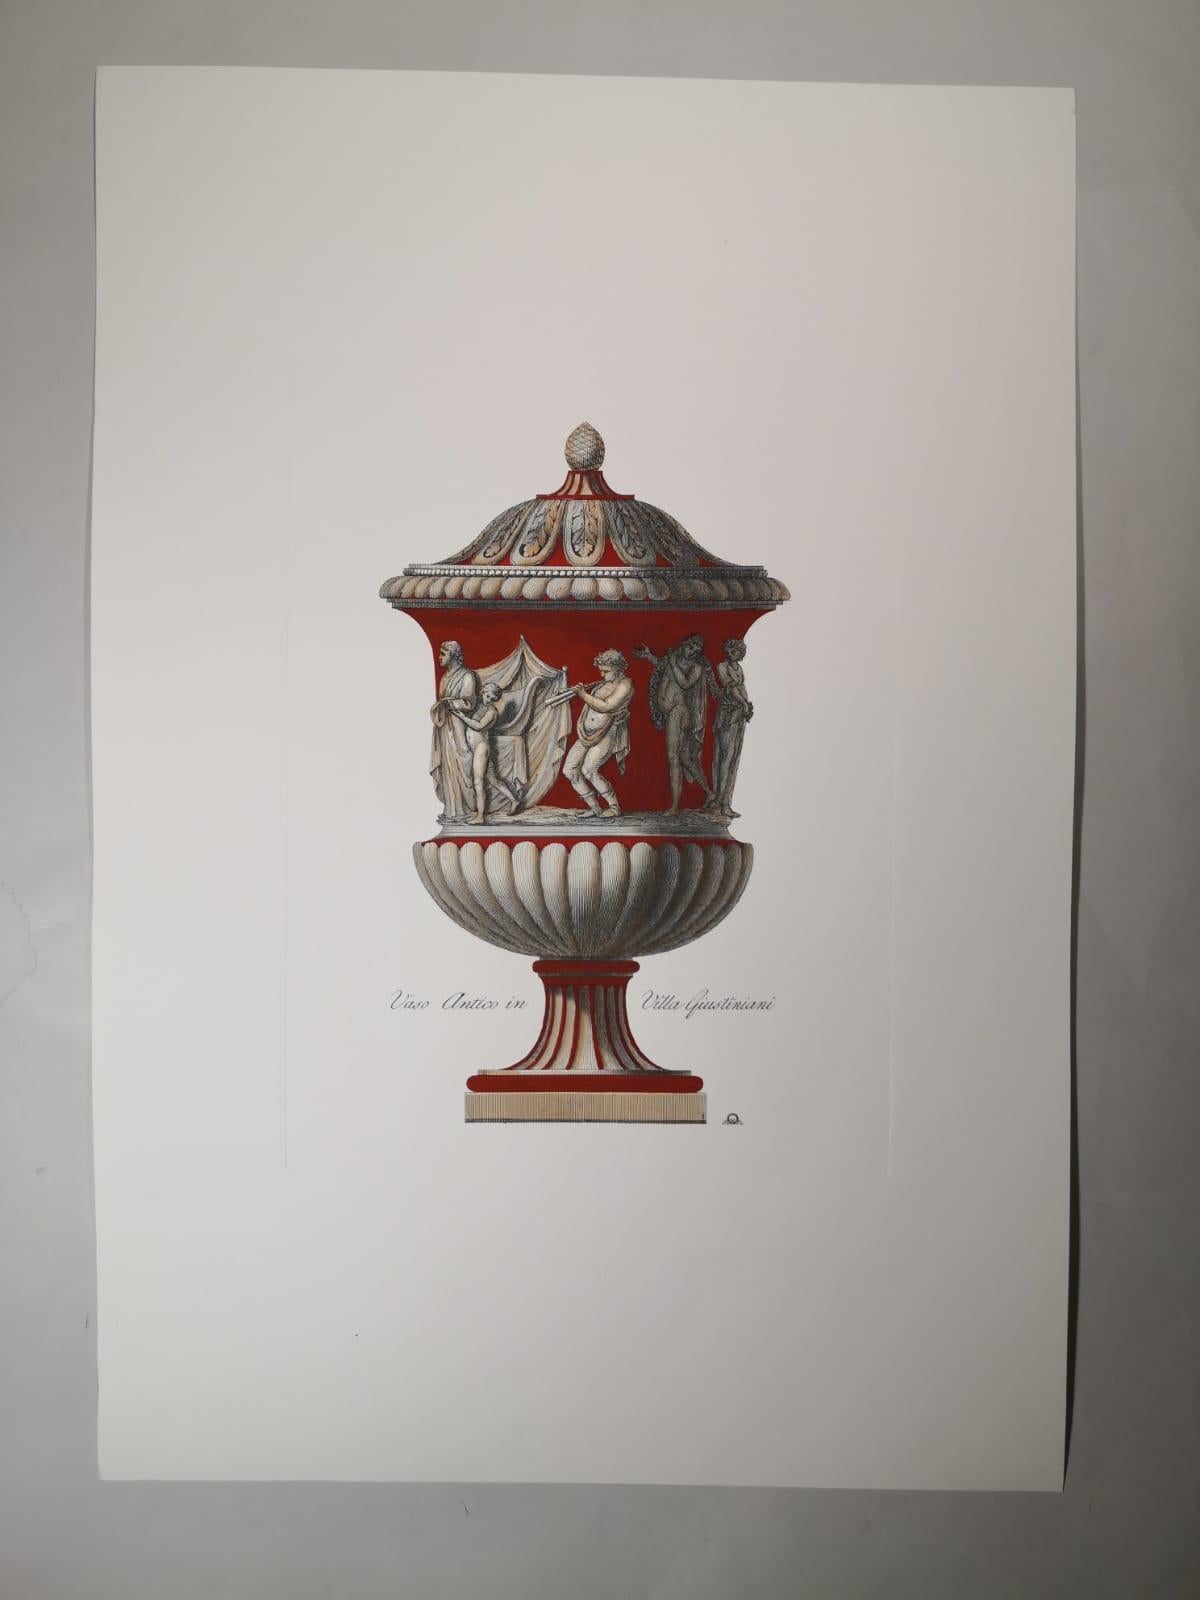 Series of two prints representing 2 different ancient Italian vases of Villa Giustiniani. It is printed with an antique press and colored by our best local artist sans.
With an experience of over 40 years, Artecornici design create high quality